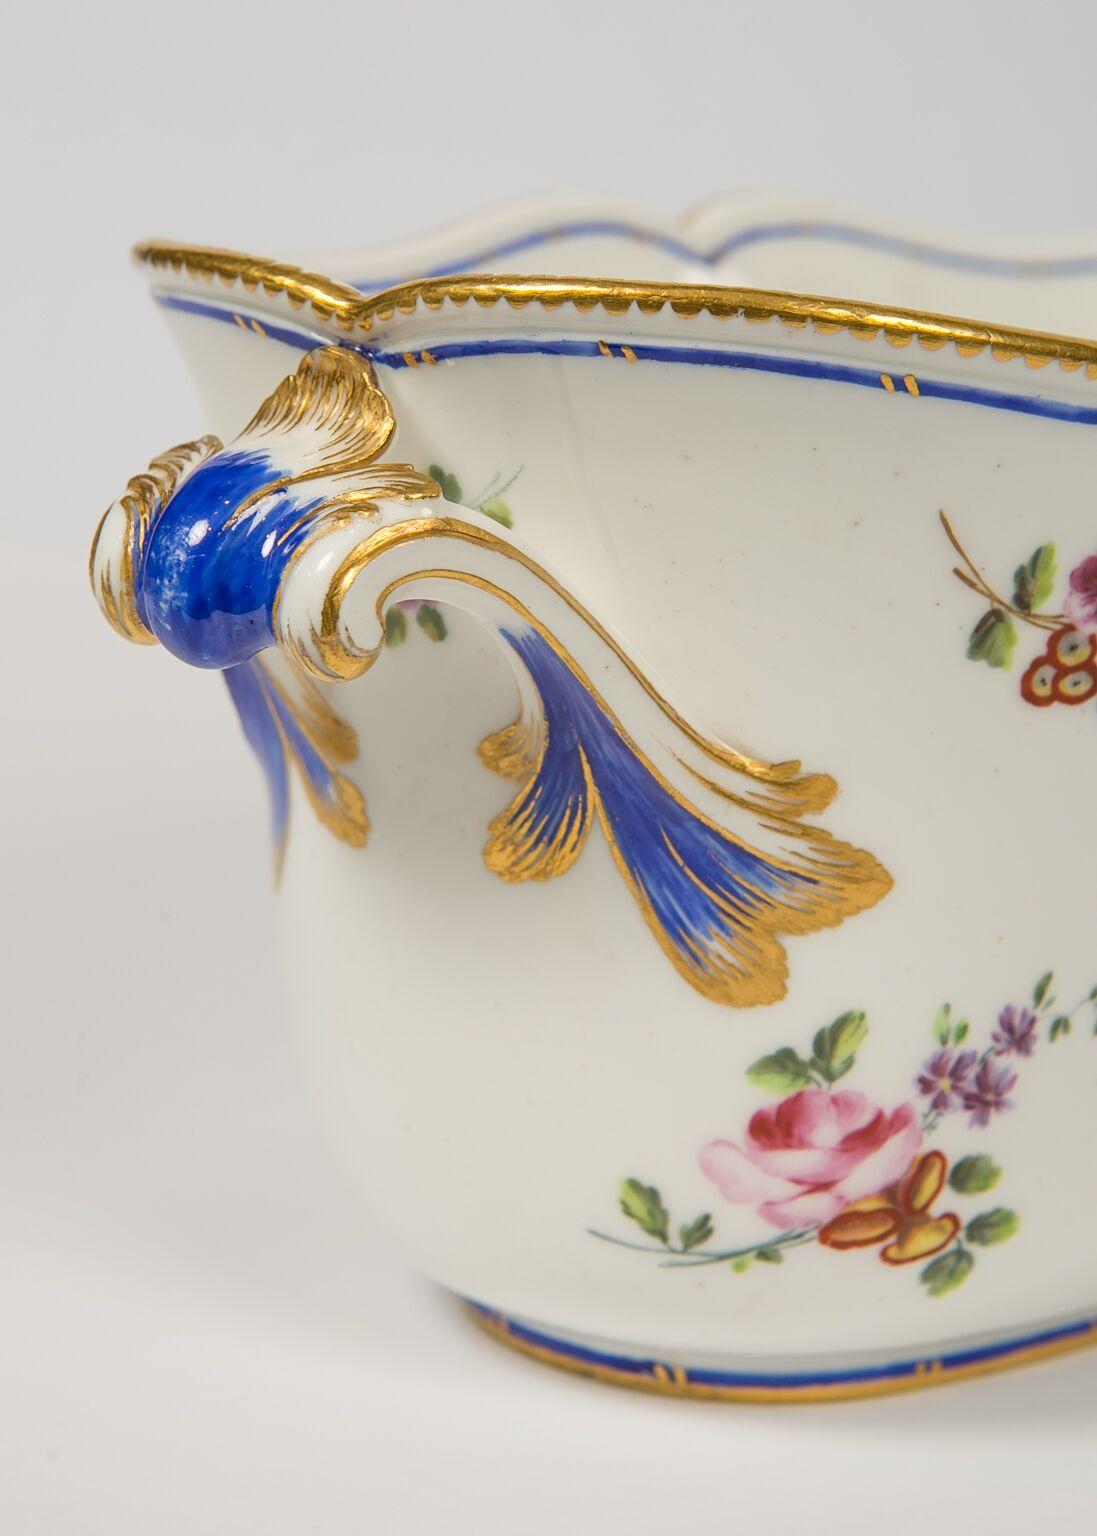 Hand-Painted French Porcelain Vincennes Bottle Cooler Made 1752-1753 Later Known as Sèvres